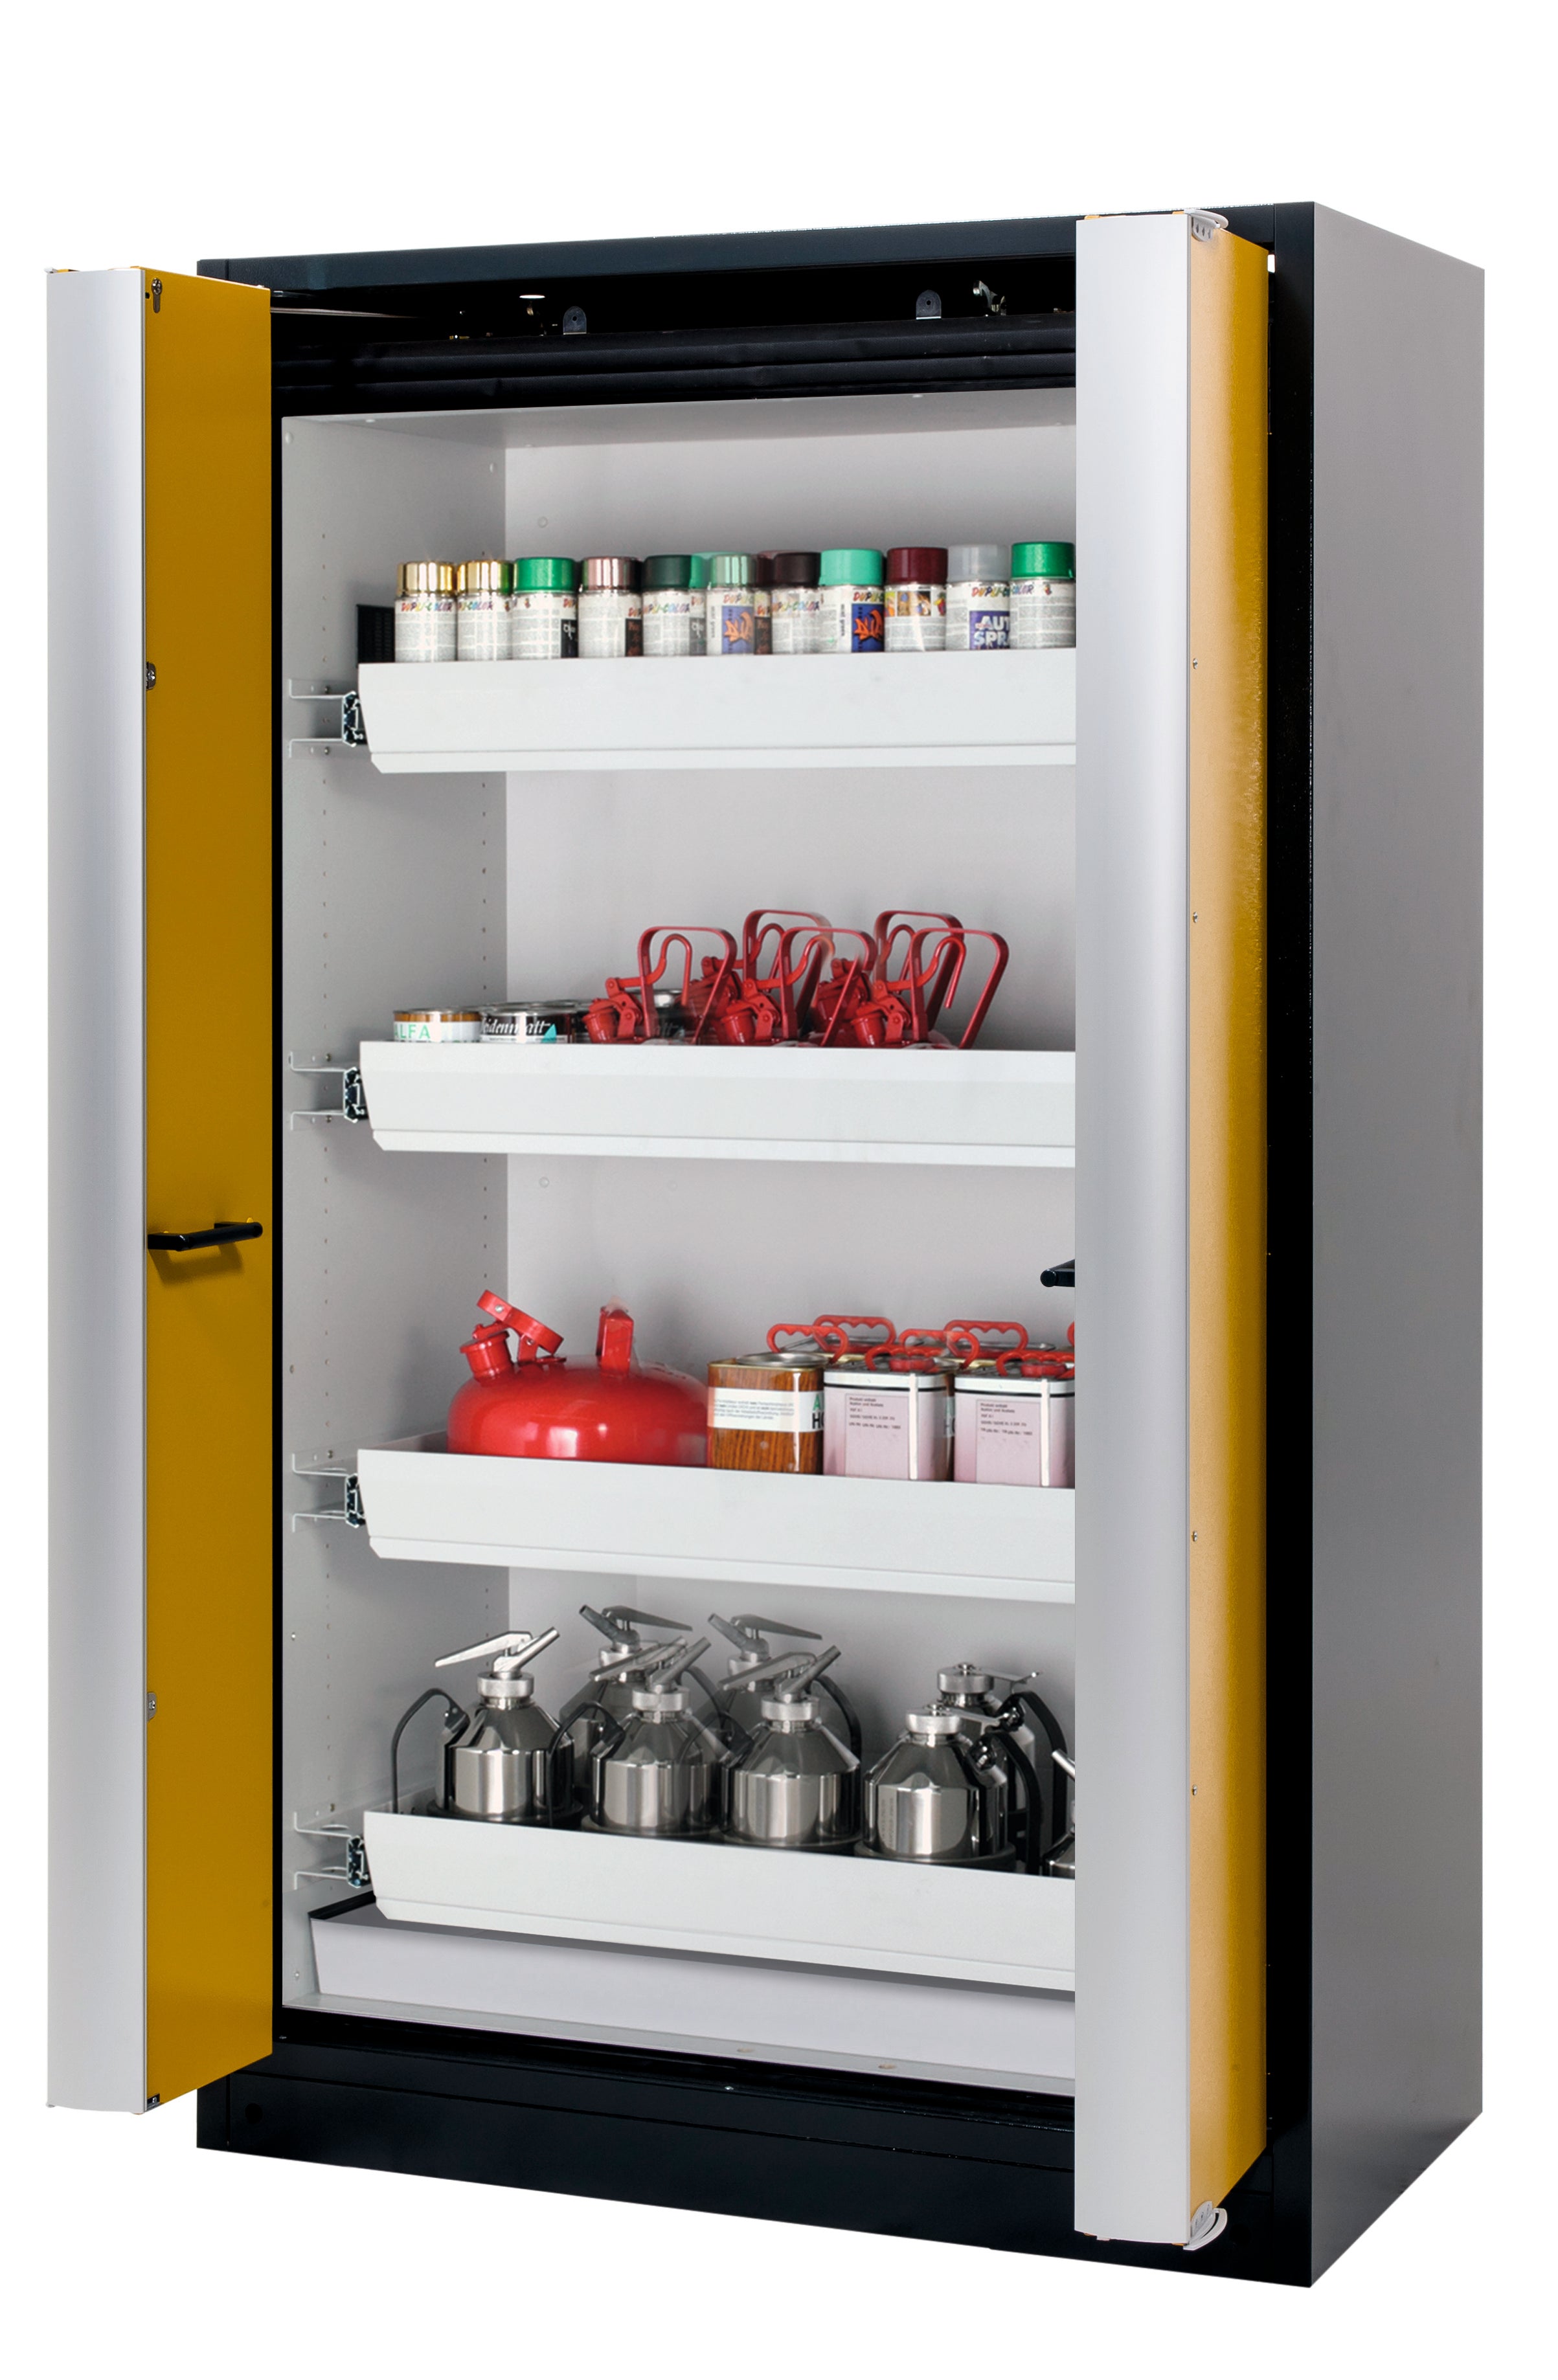 Type 90 safety cabinet Q-PHOENIX-90 model Q90.195.120.FD in safety yellow RAL 1004 with 4x standard pull-out tray (sheet steel)